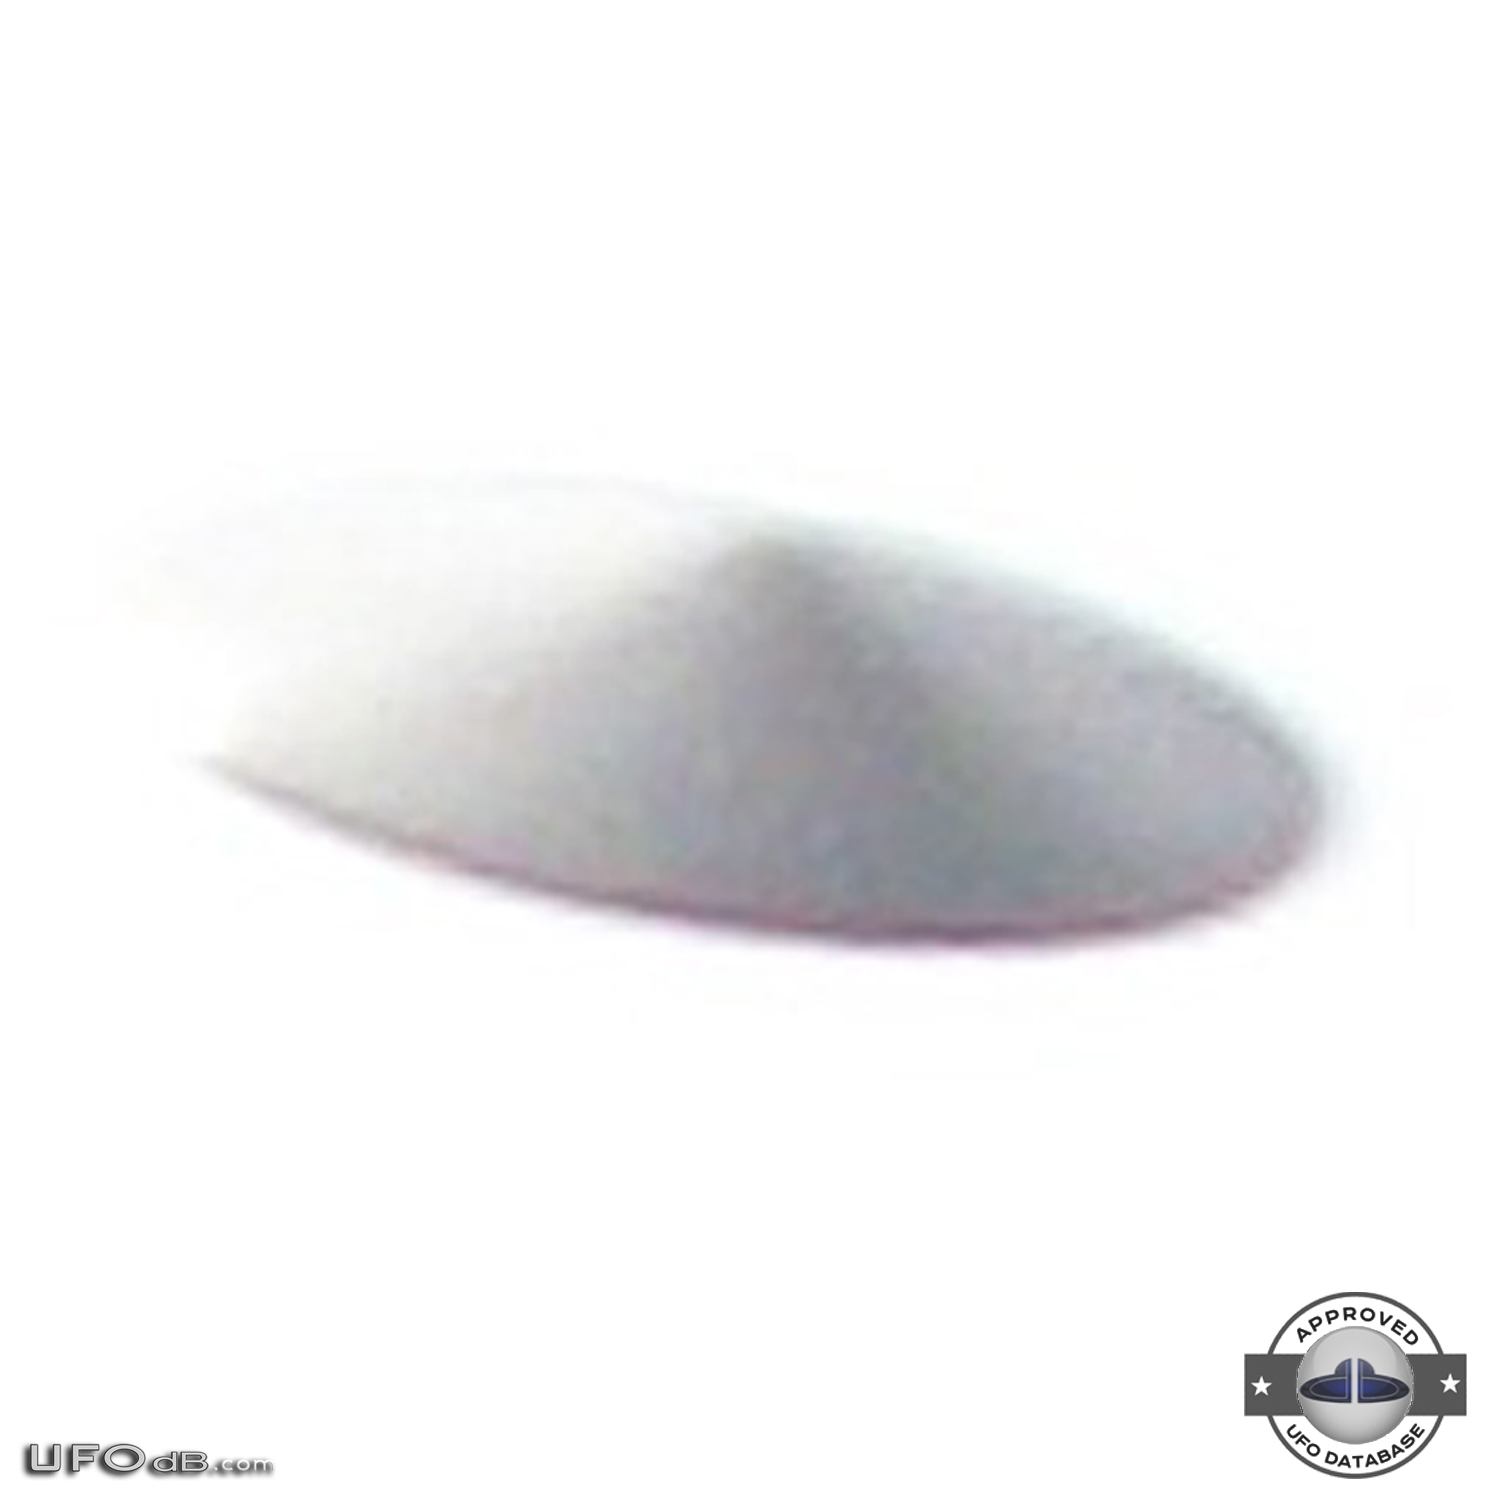 Silver saucer UFO caught on picture in Bristol, England UK - 2010 UFO Picture #412-4